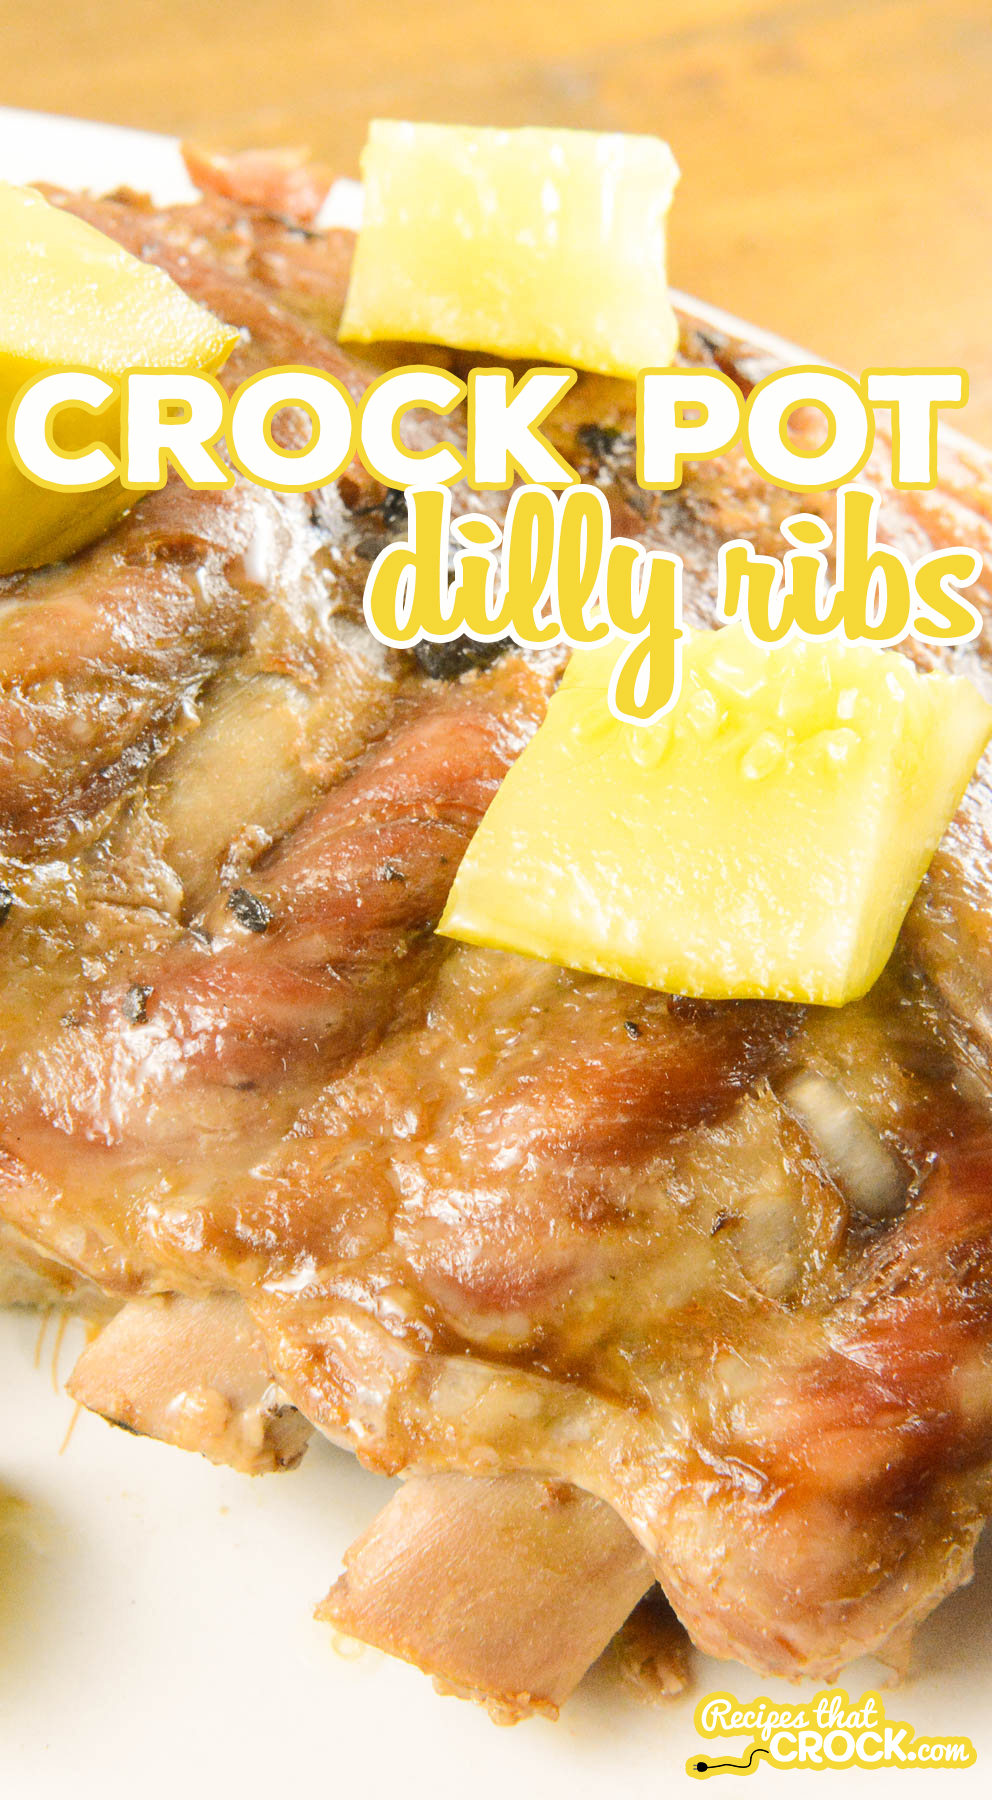 Our Crock Pot Dilly Ribs are a very easy way to make very flavorful pork ribs that are fall apart tender every time! This fail-proof recipe is perfect for beginners and experienced cooks alike!